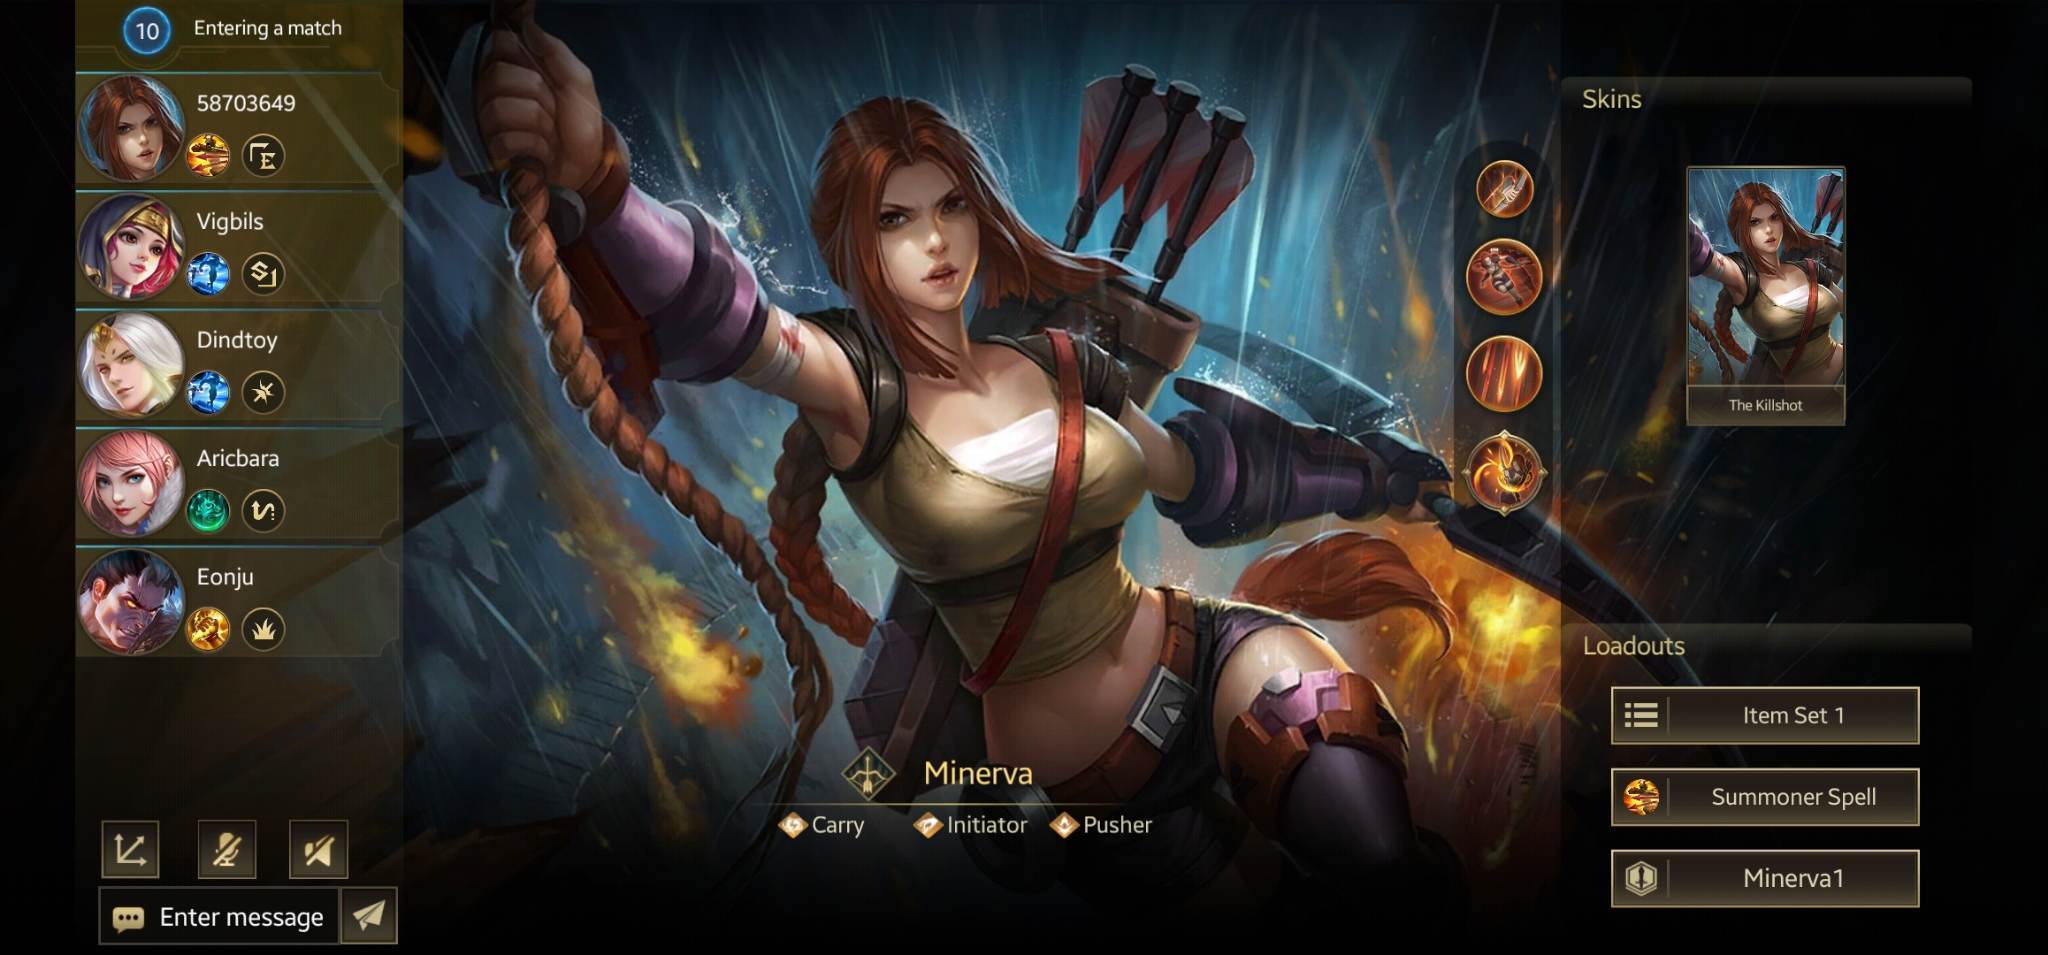 League of Legends: Wild Rift, Interface In Game